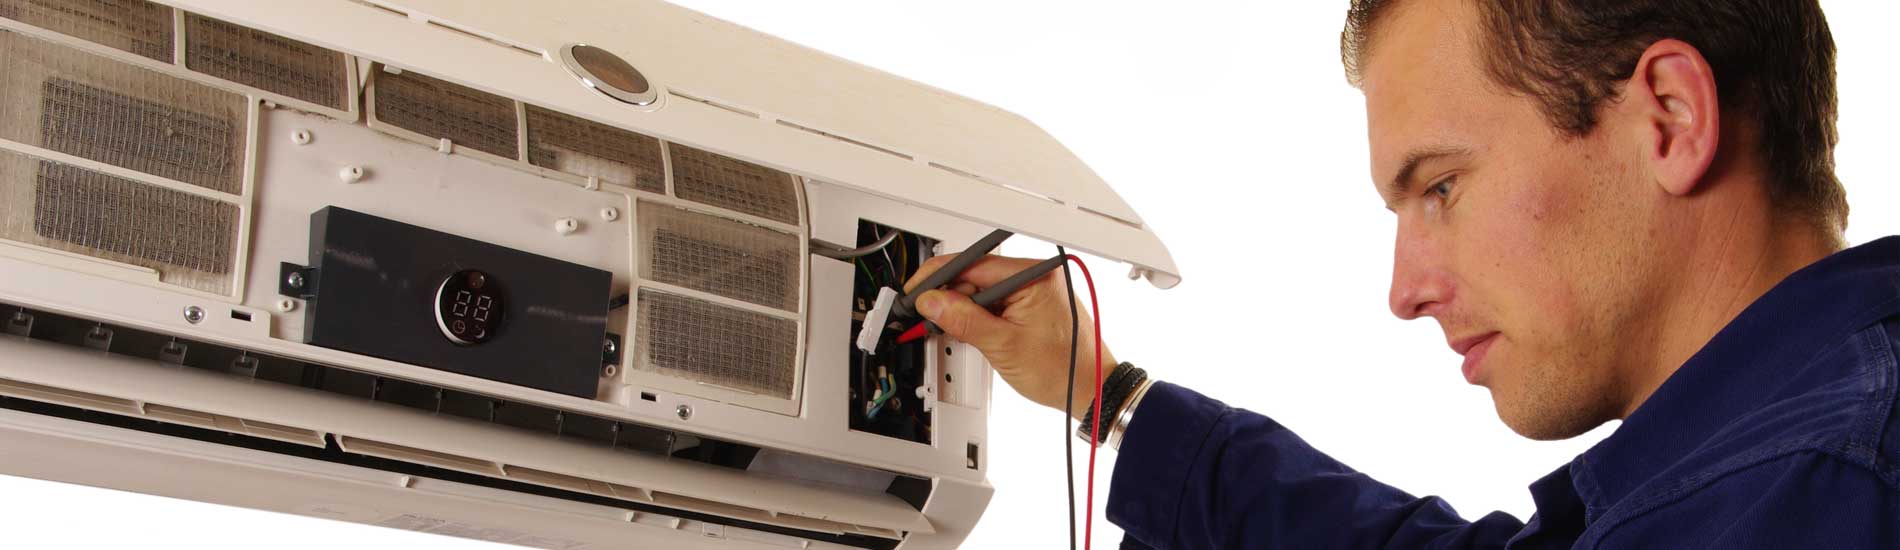 air conditioning repair and service near me